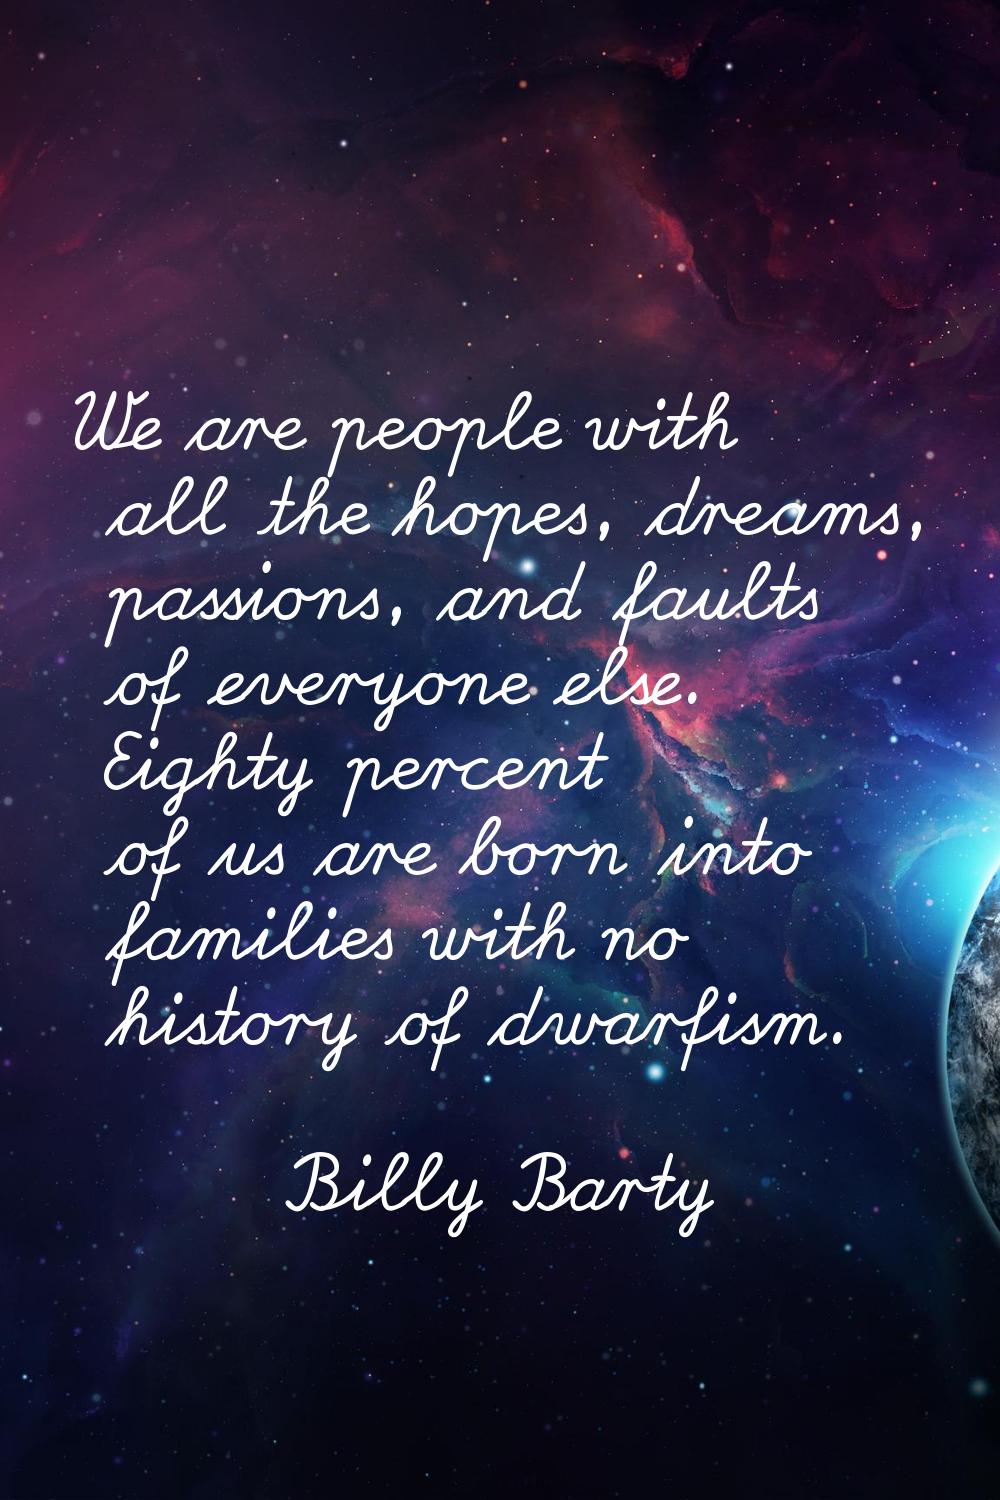 We are people with all the hopes, dreams, passions, and faults of everyone else. Eighty percent of 